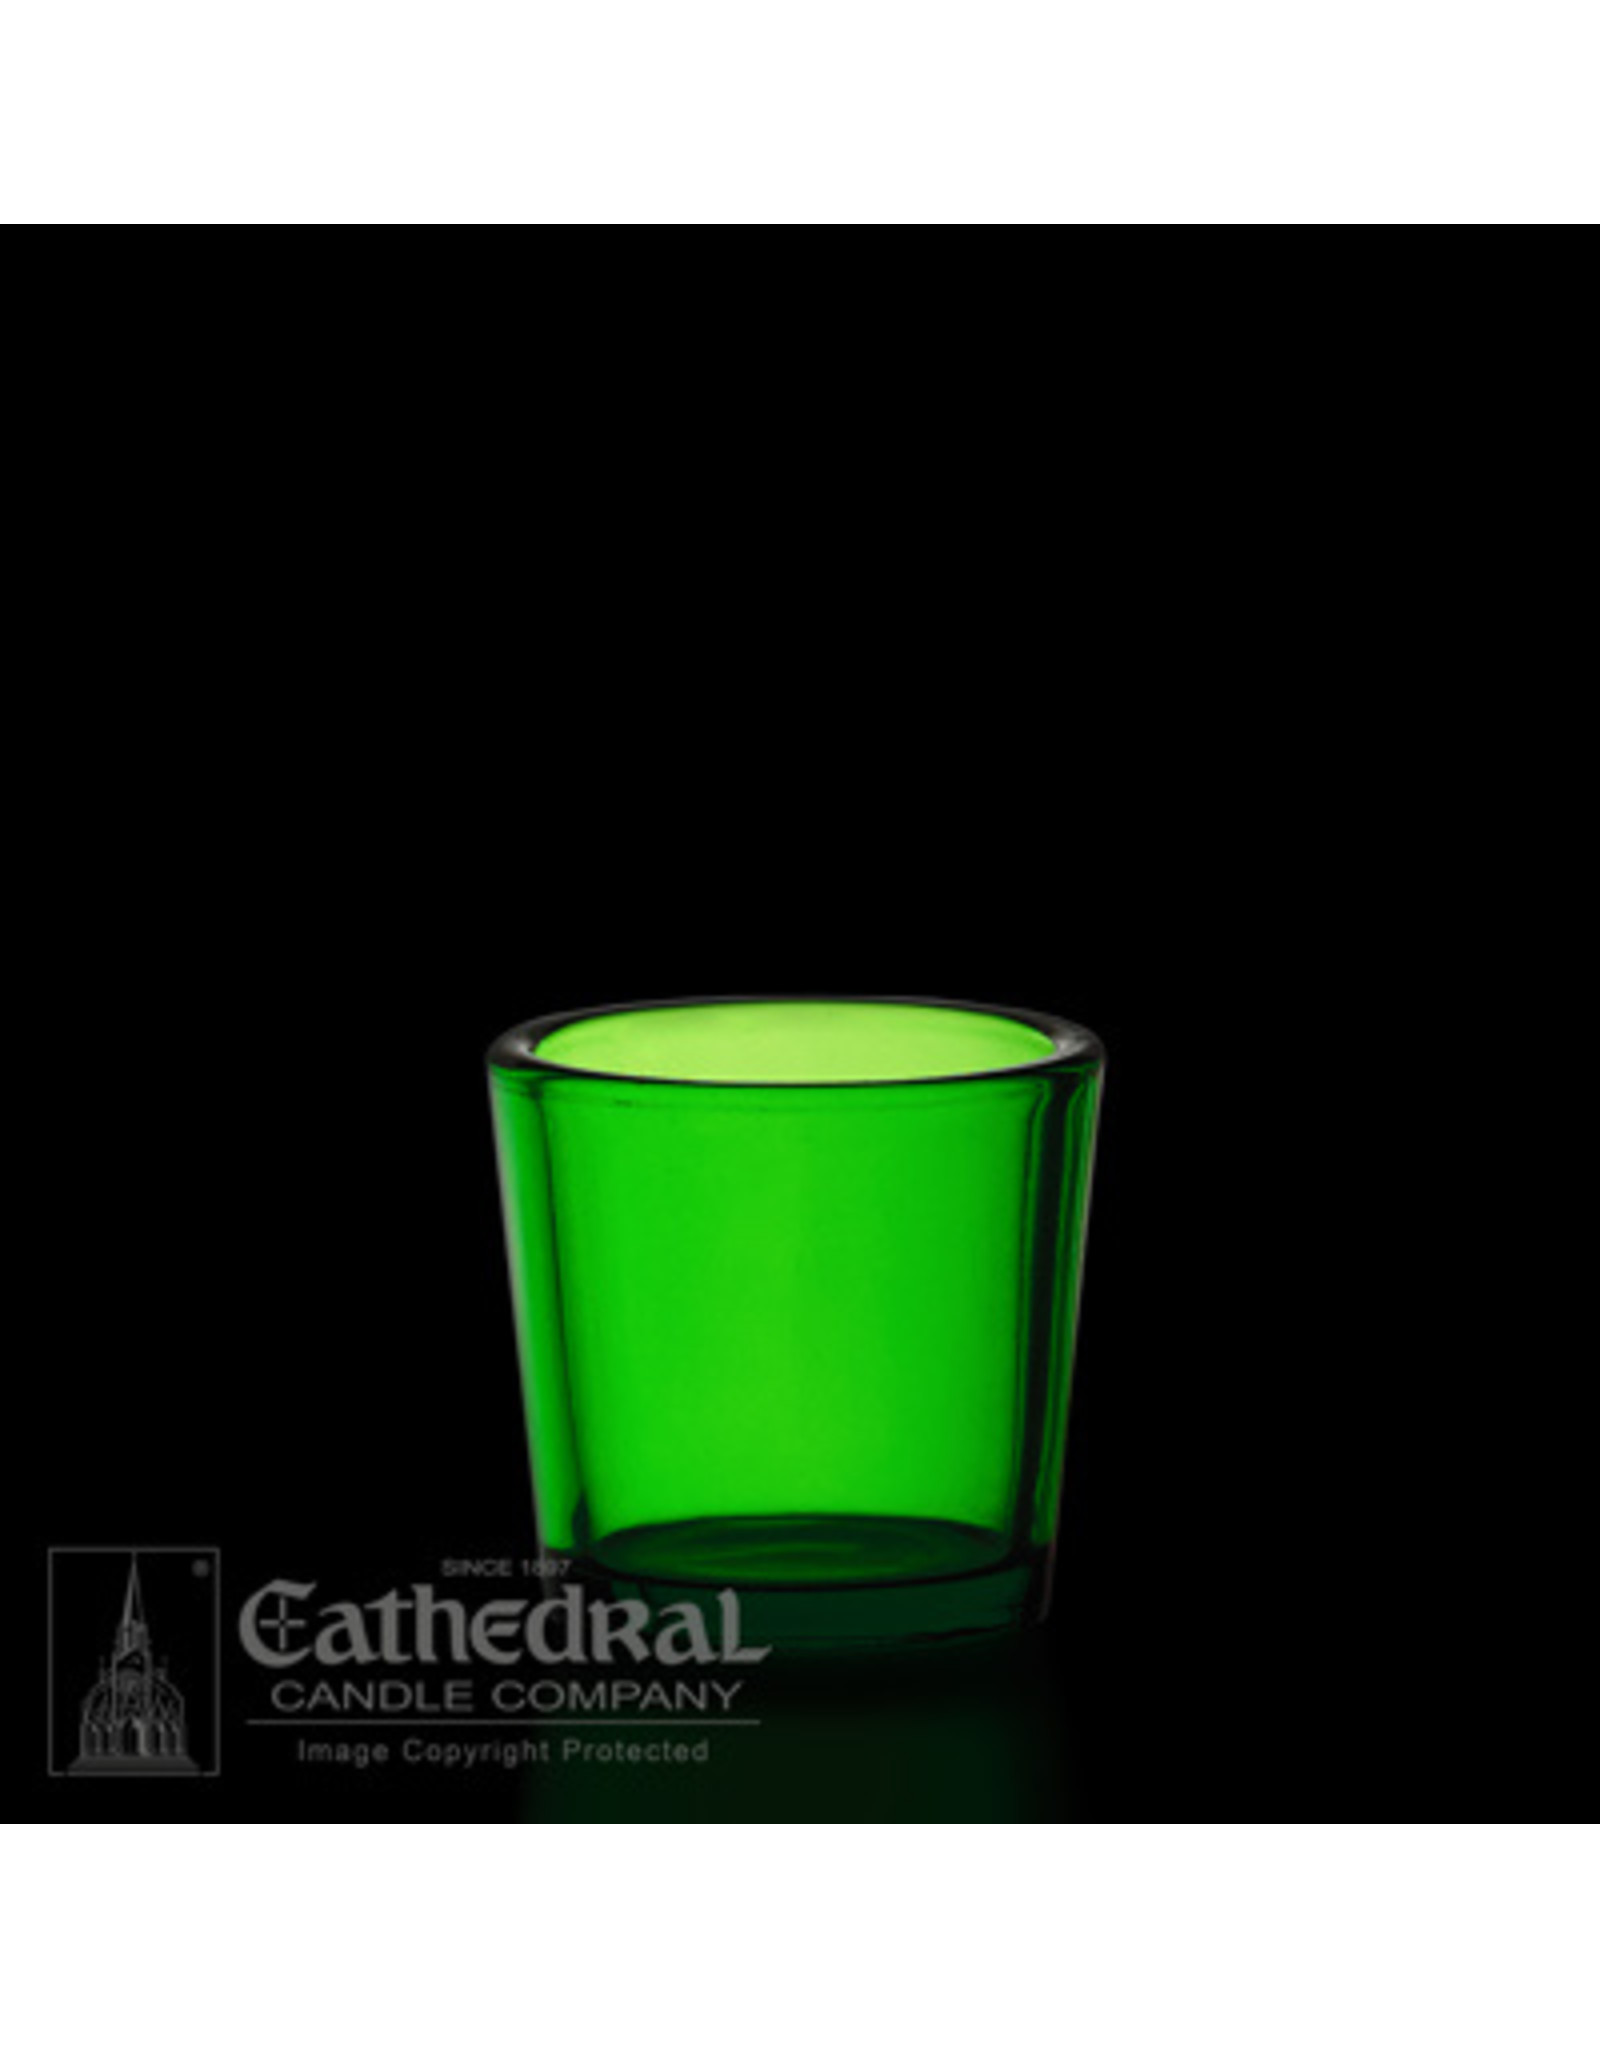 Cathedral Candle Votive Light Glasses - Green, 2-10 Hour (12)